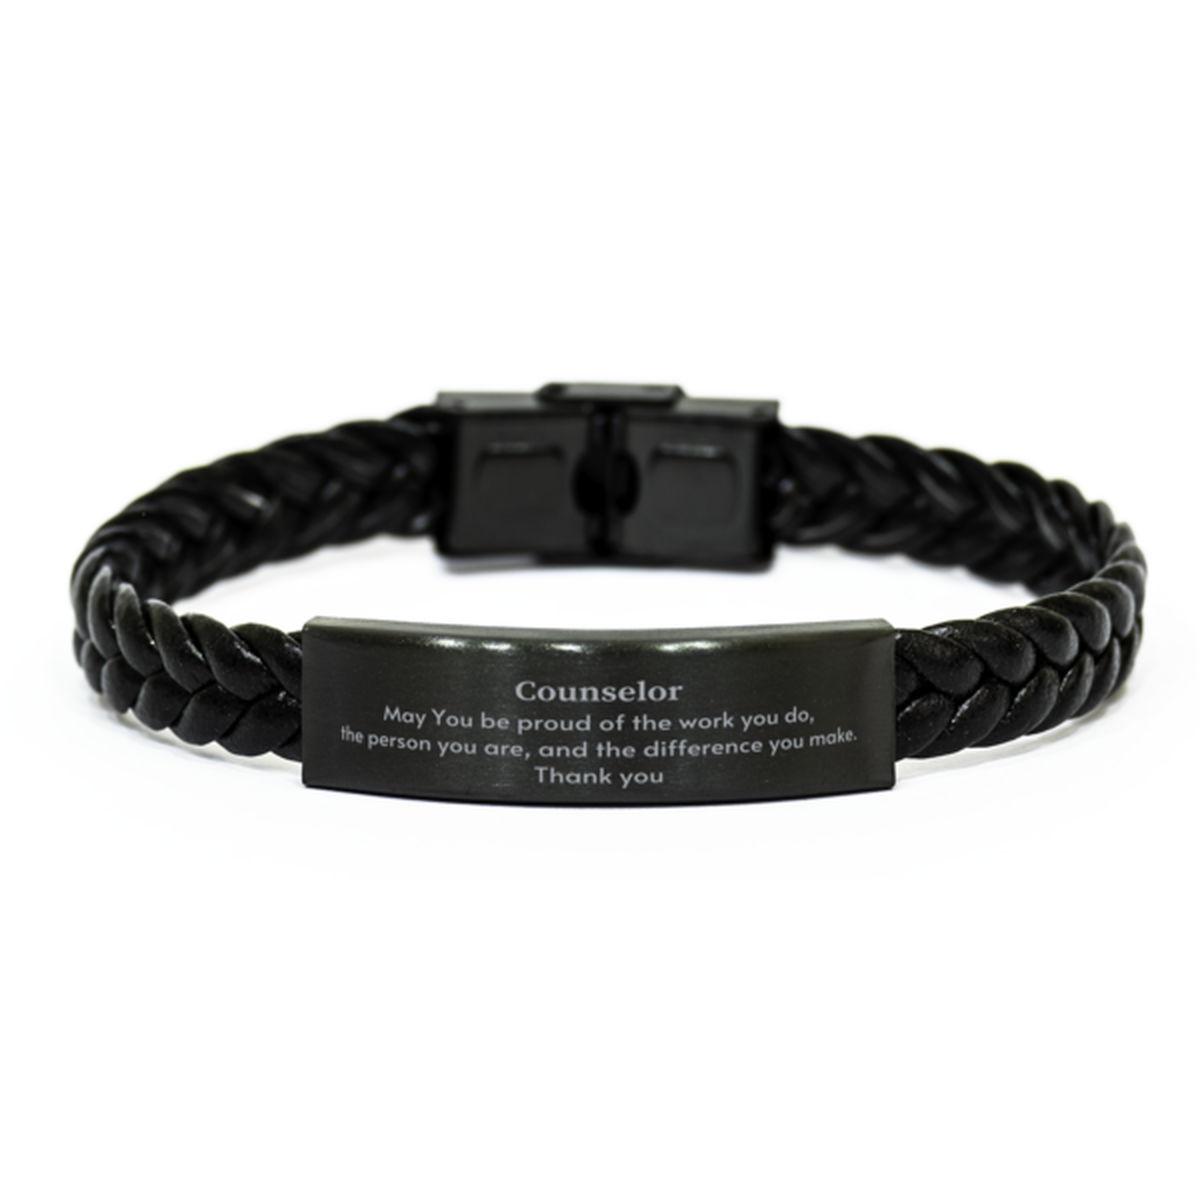 Heartwarming Braided Leather Bracelet Retirement Coworkers Gifts for Counselor, Counselor May You be proud of the work you do, the person you are Gifts for Boss Men Women Friends